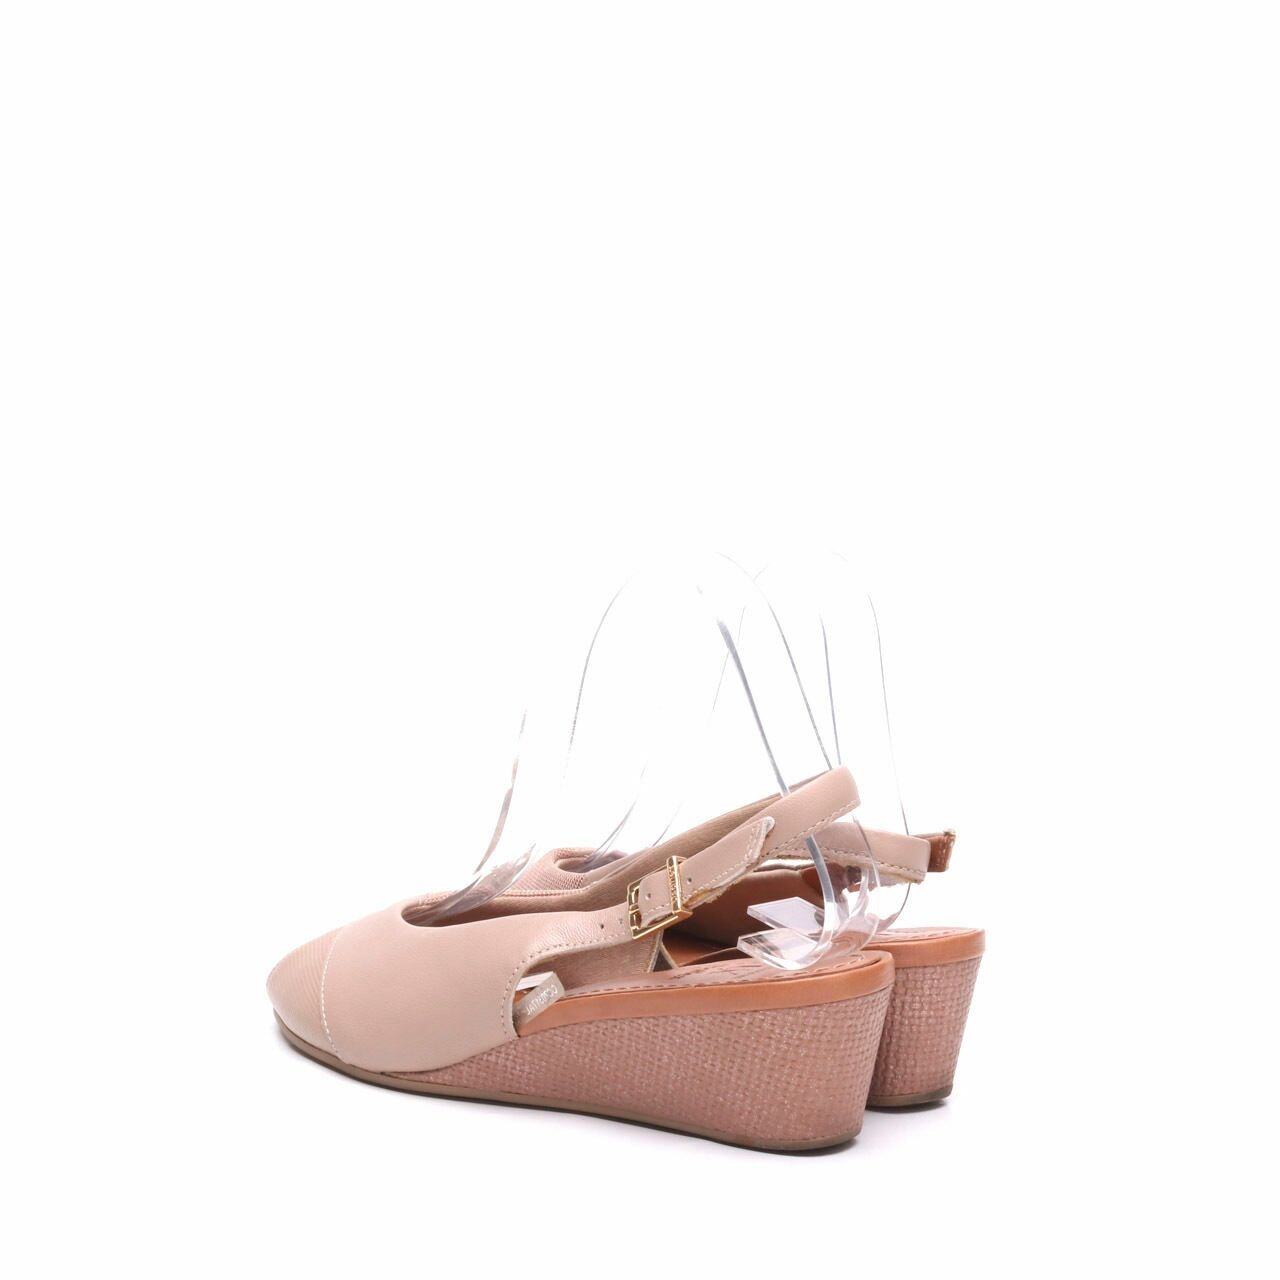 Obermain x Usaflex Taupe Wedges